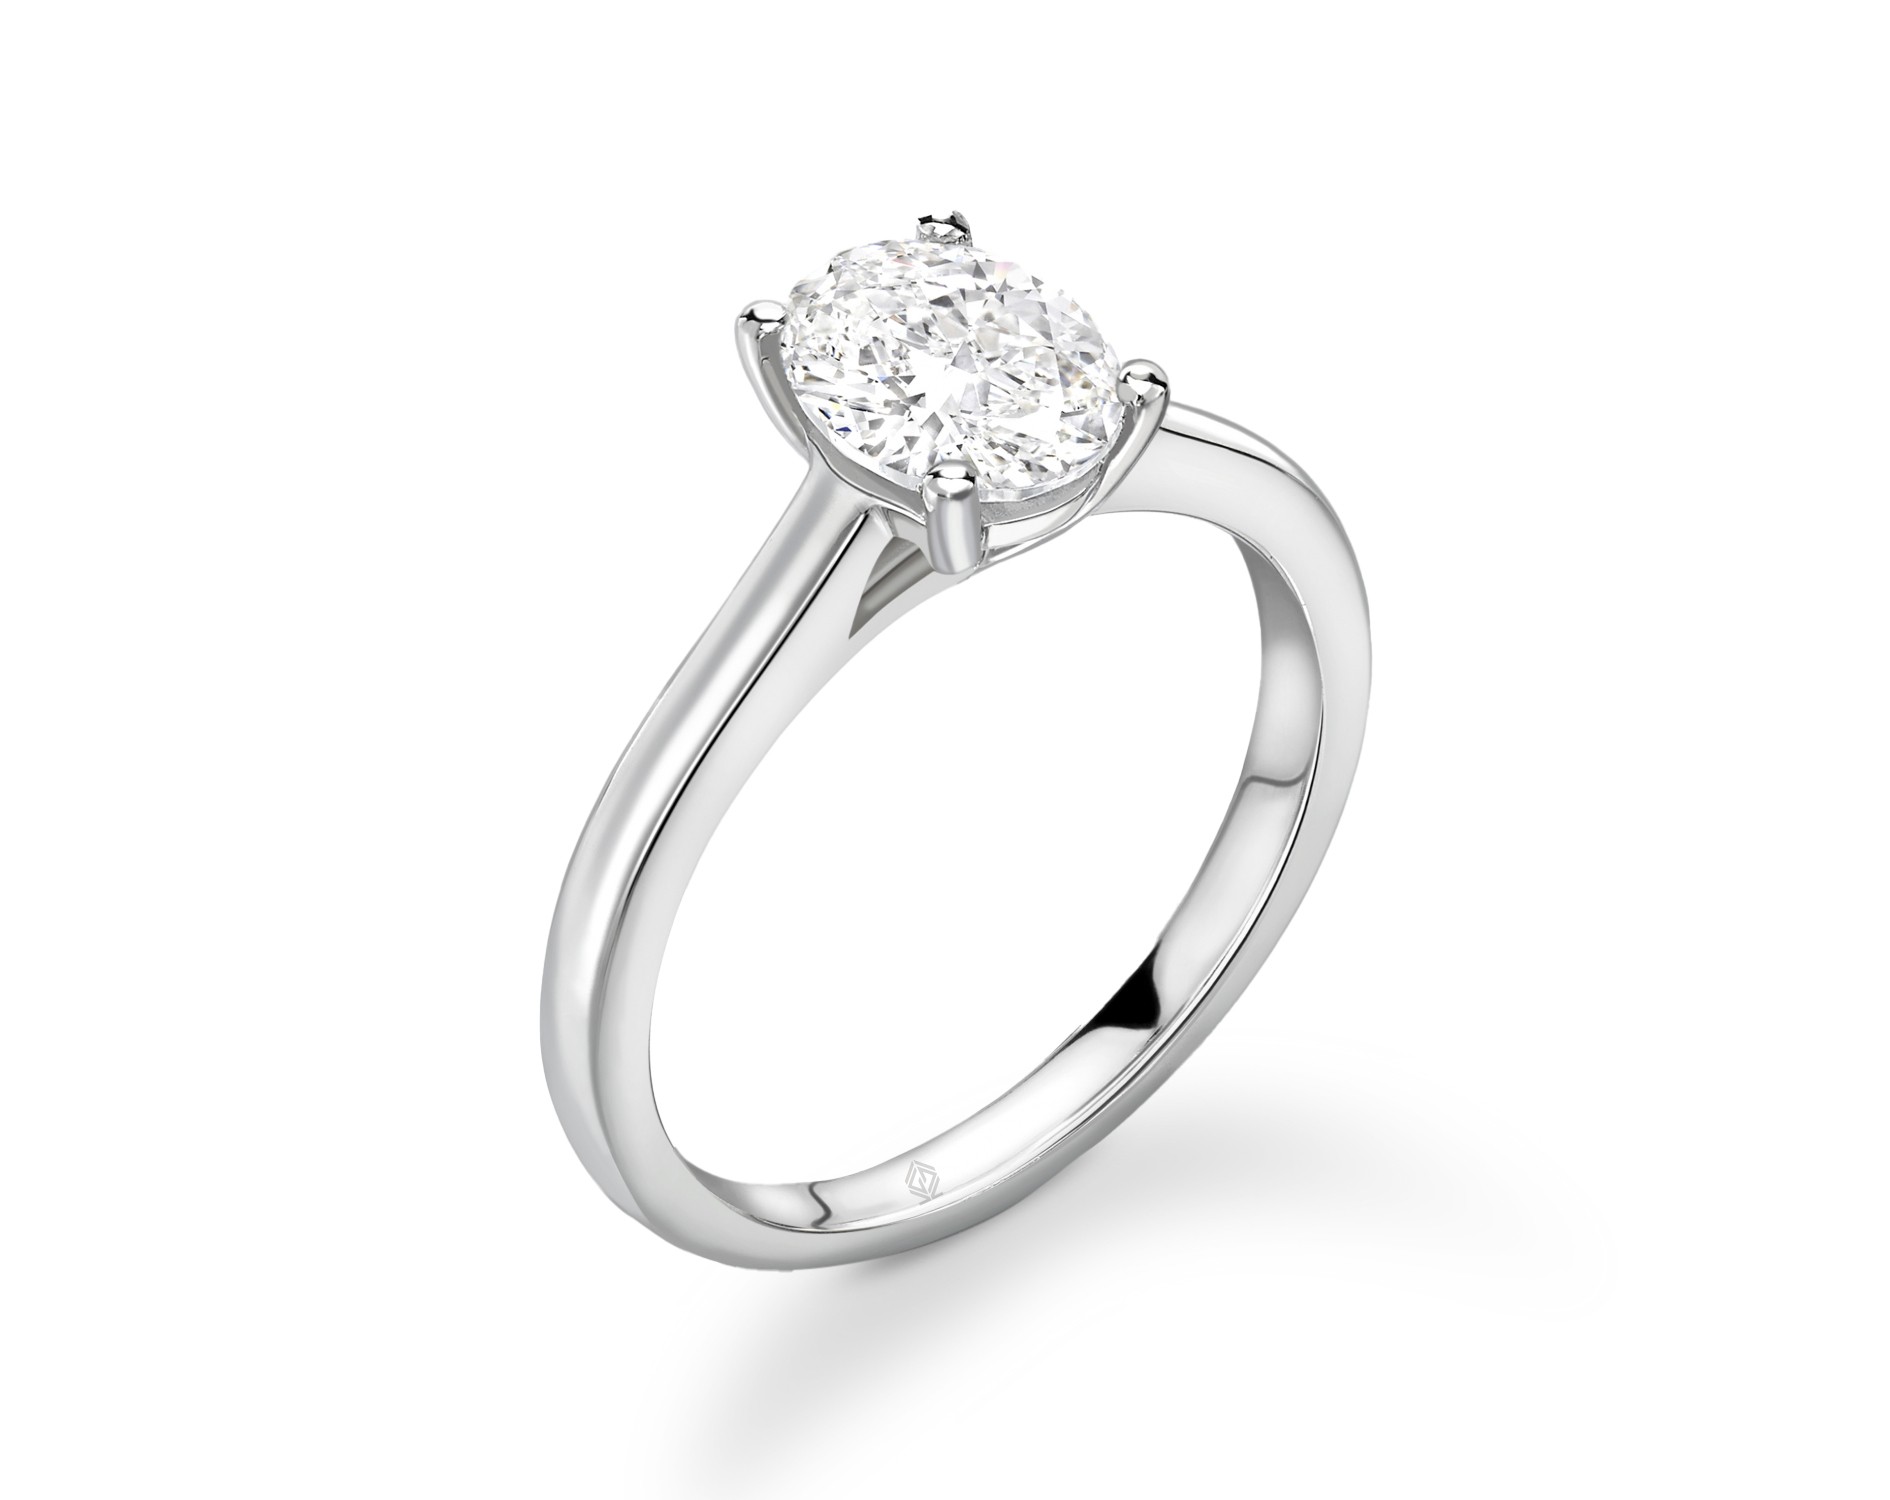 18K WHITE GOLD OVAL CUT SOLITAIRE DIAMOND ENGAGEMENT RING